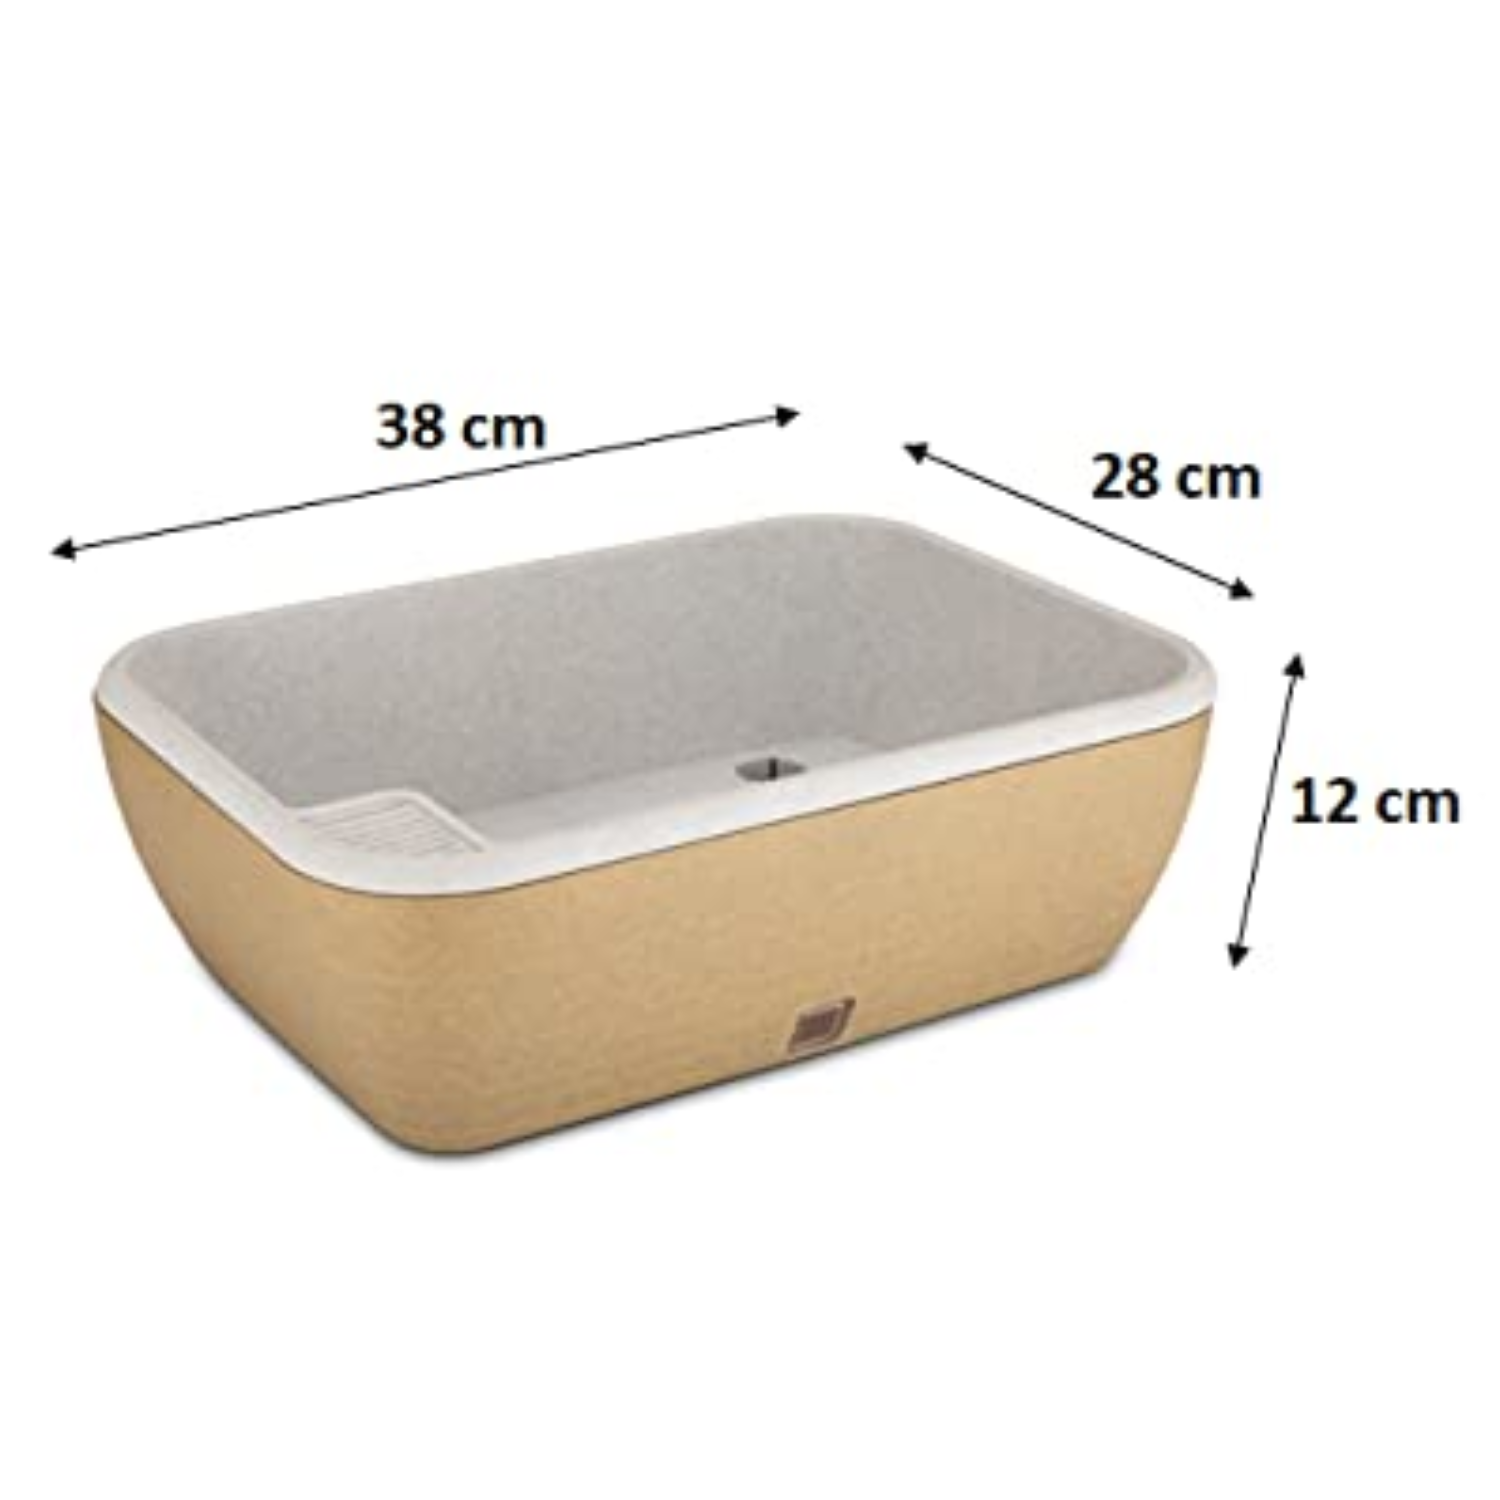 Contessa Rectangle Pot for Outdoor Indoor with Self-Watering System/Flower Pot (Home & Garden)